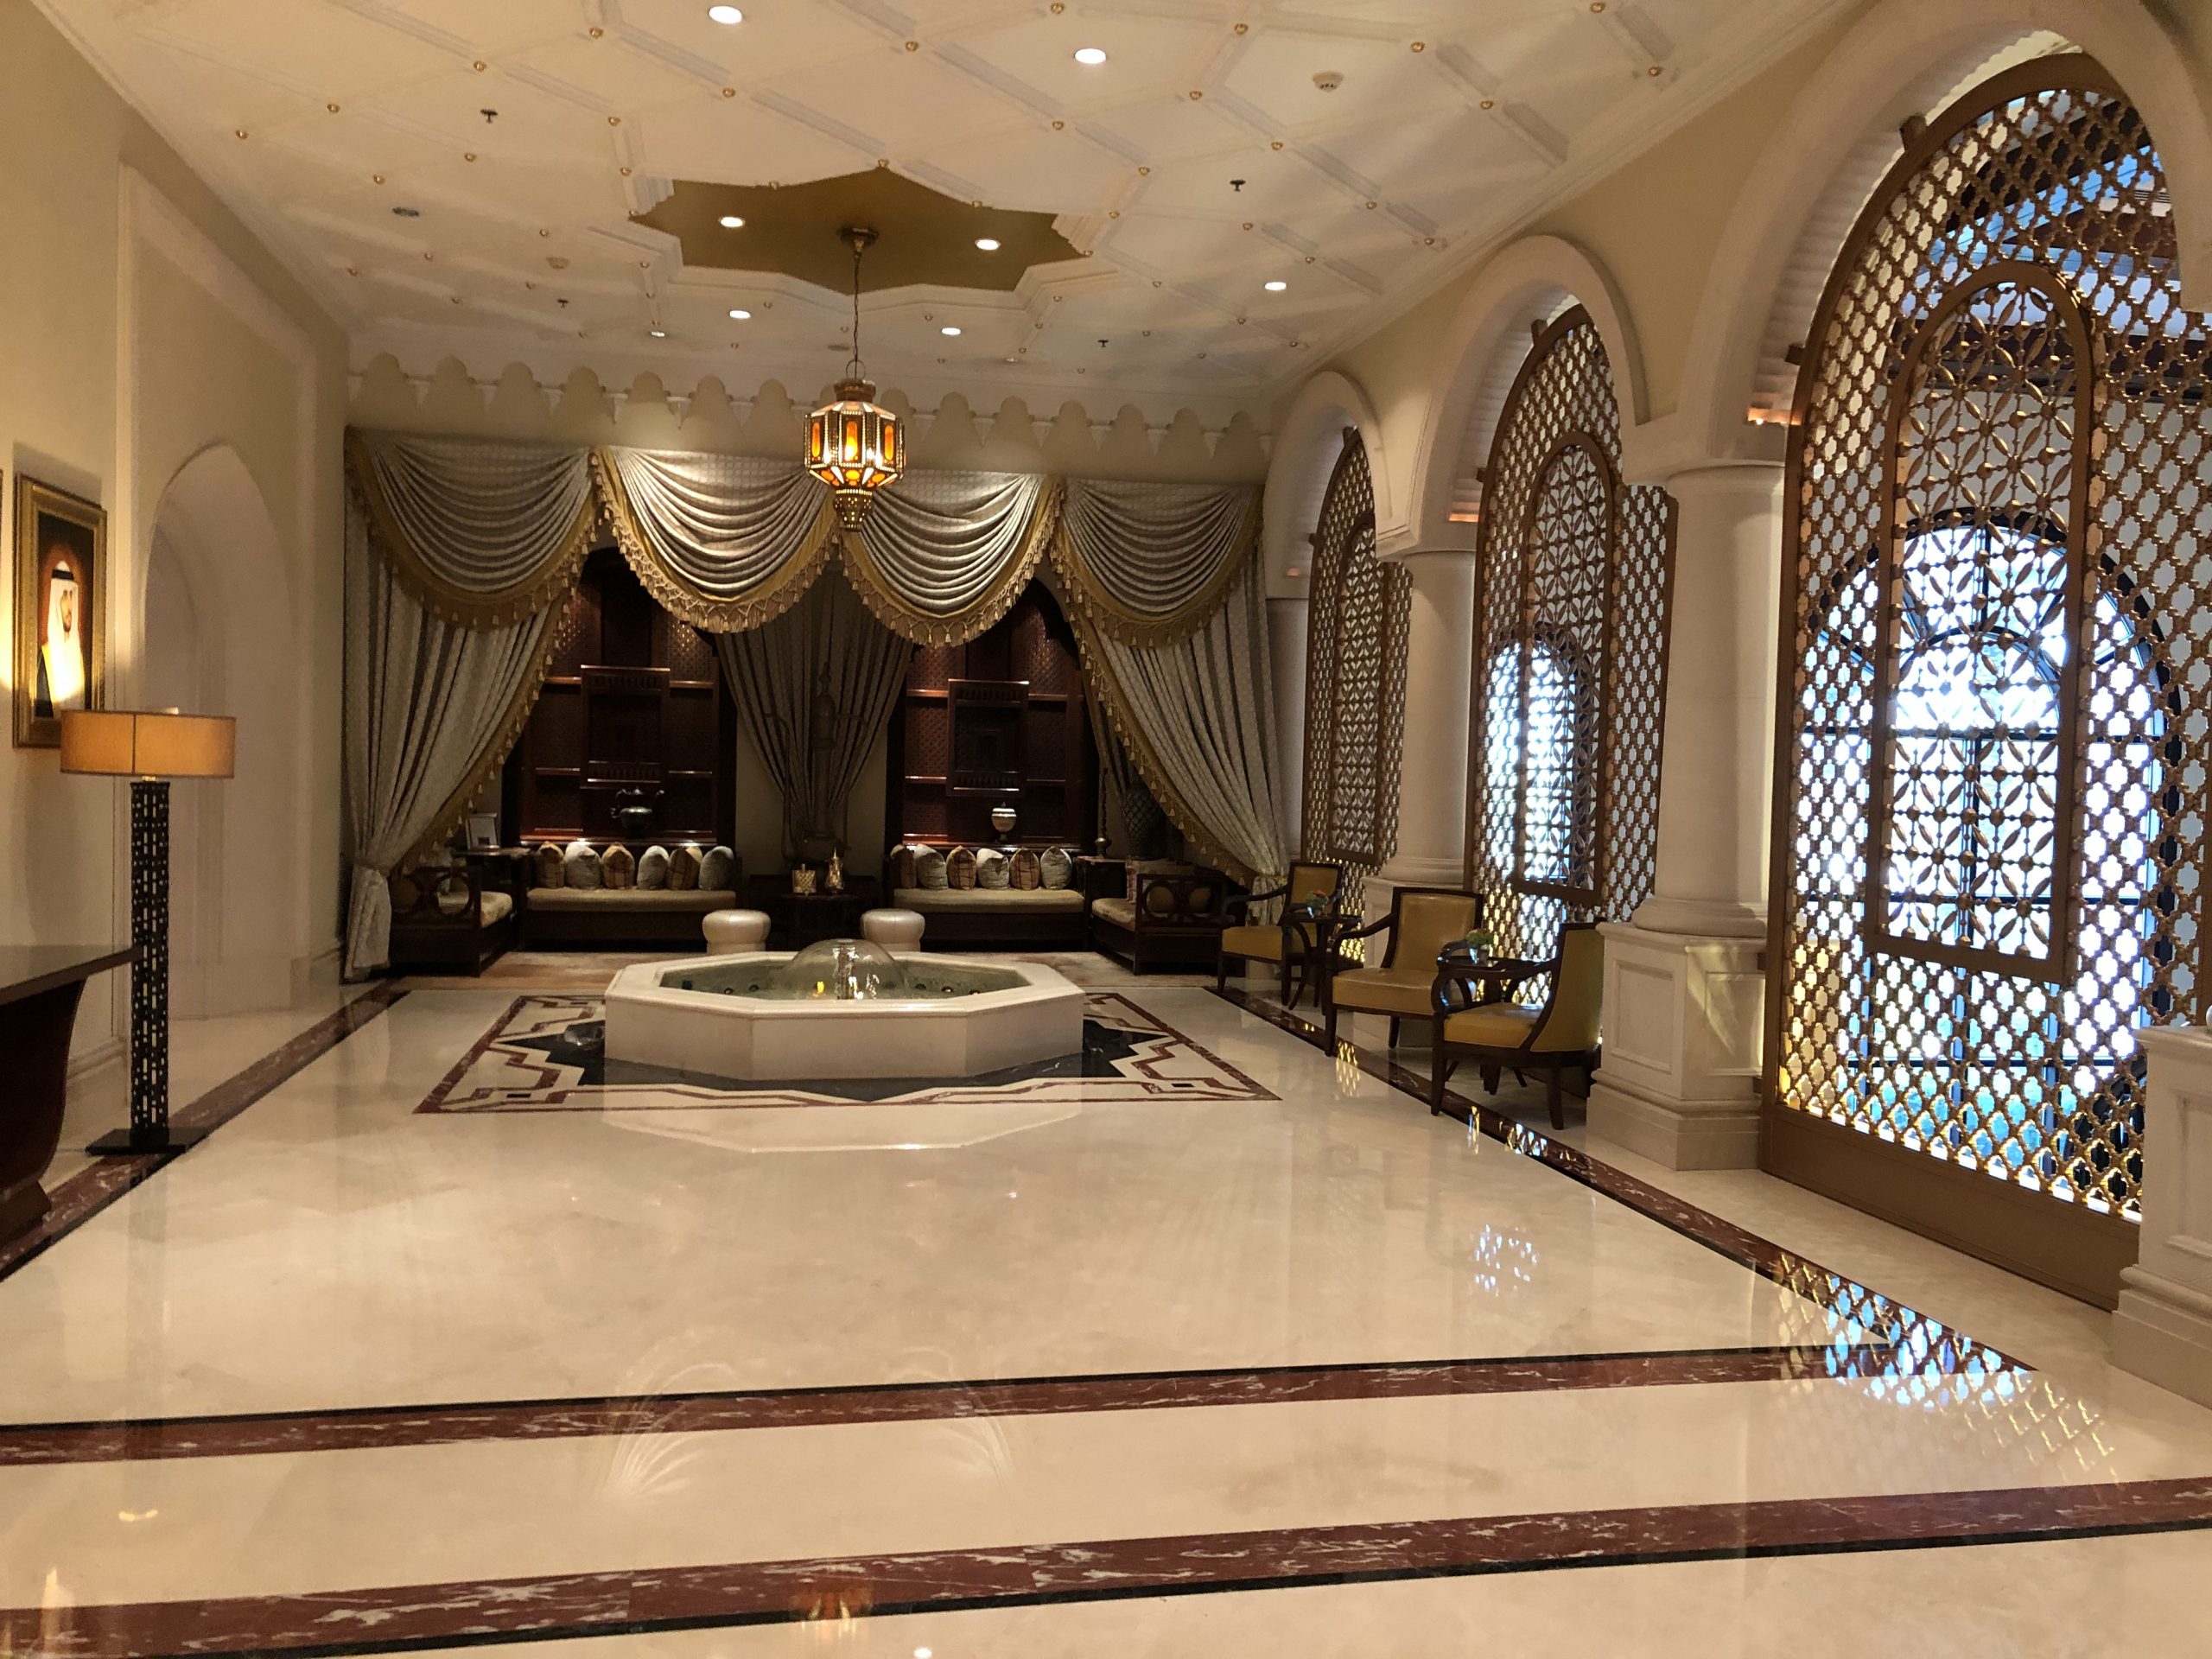 Ritz Carlton Dubai- Review of Room and Hotel Grounds